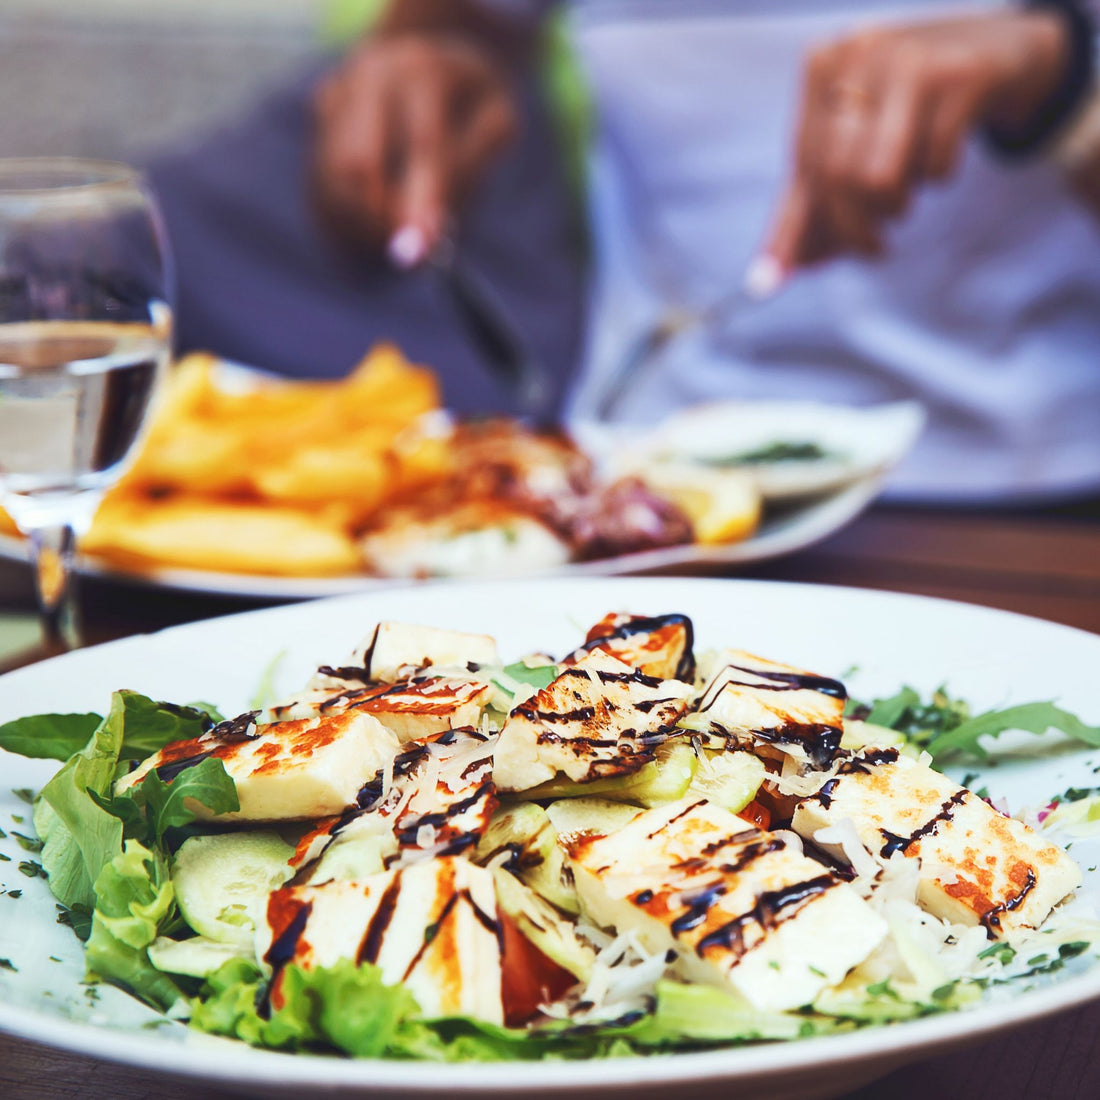 Healthy Menu Items When Dining Out